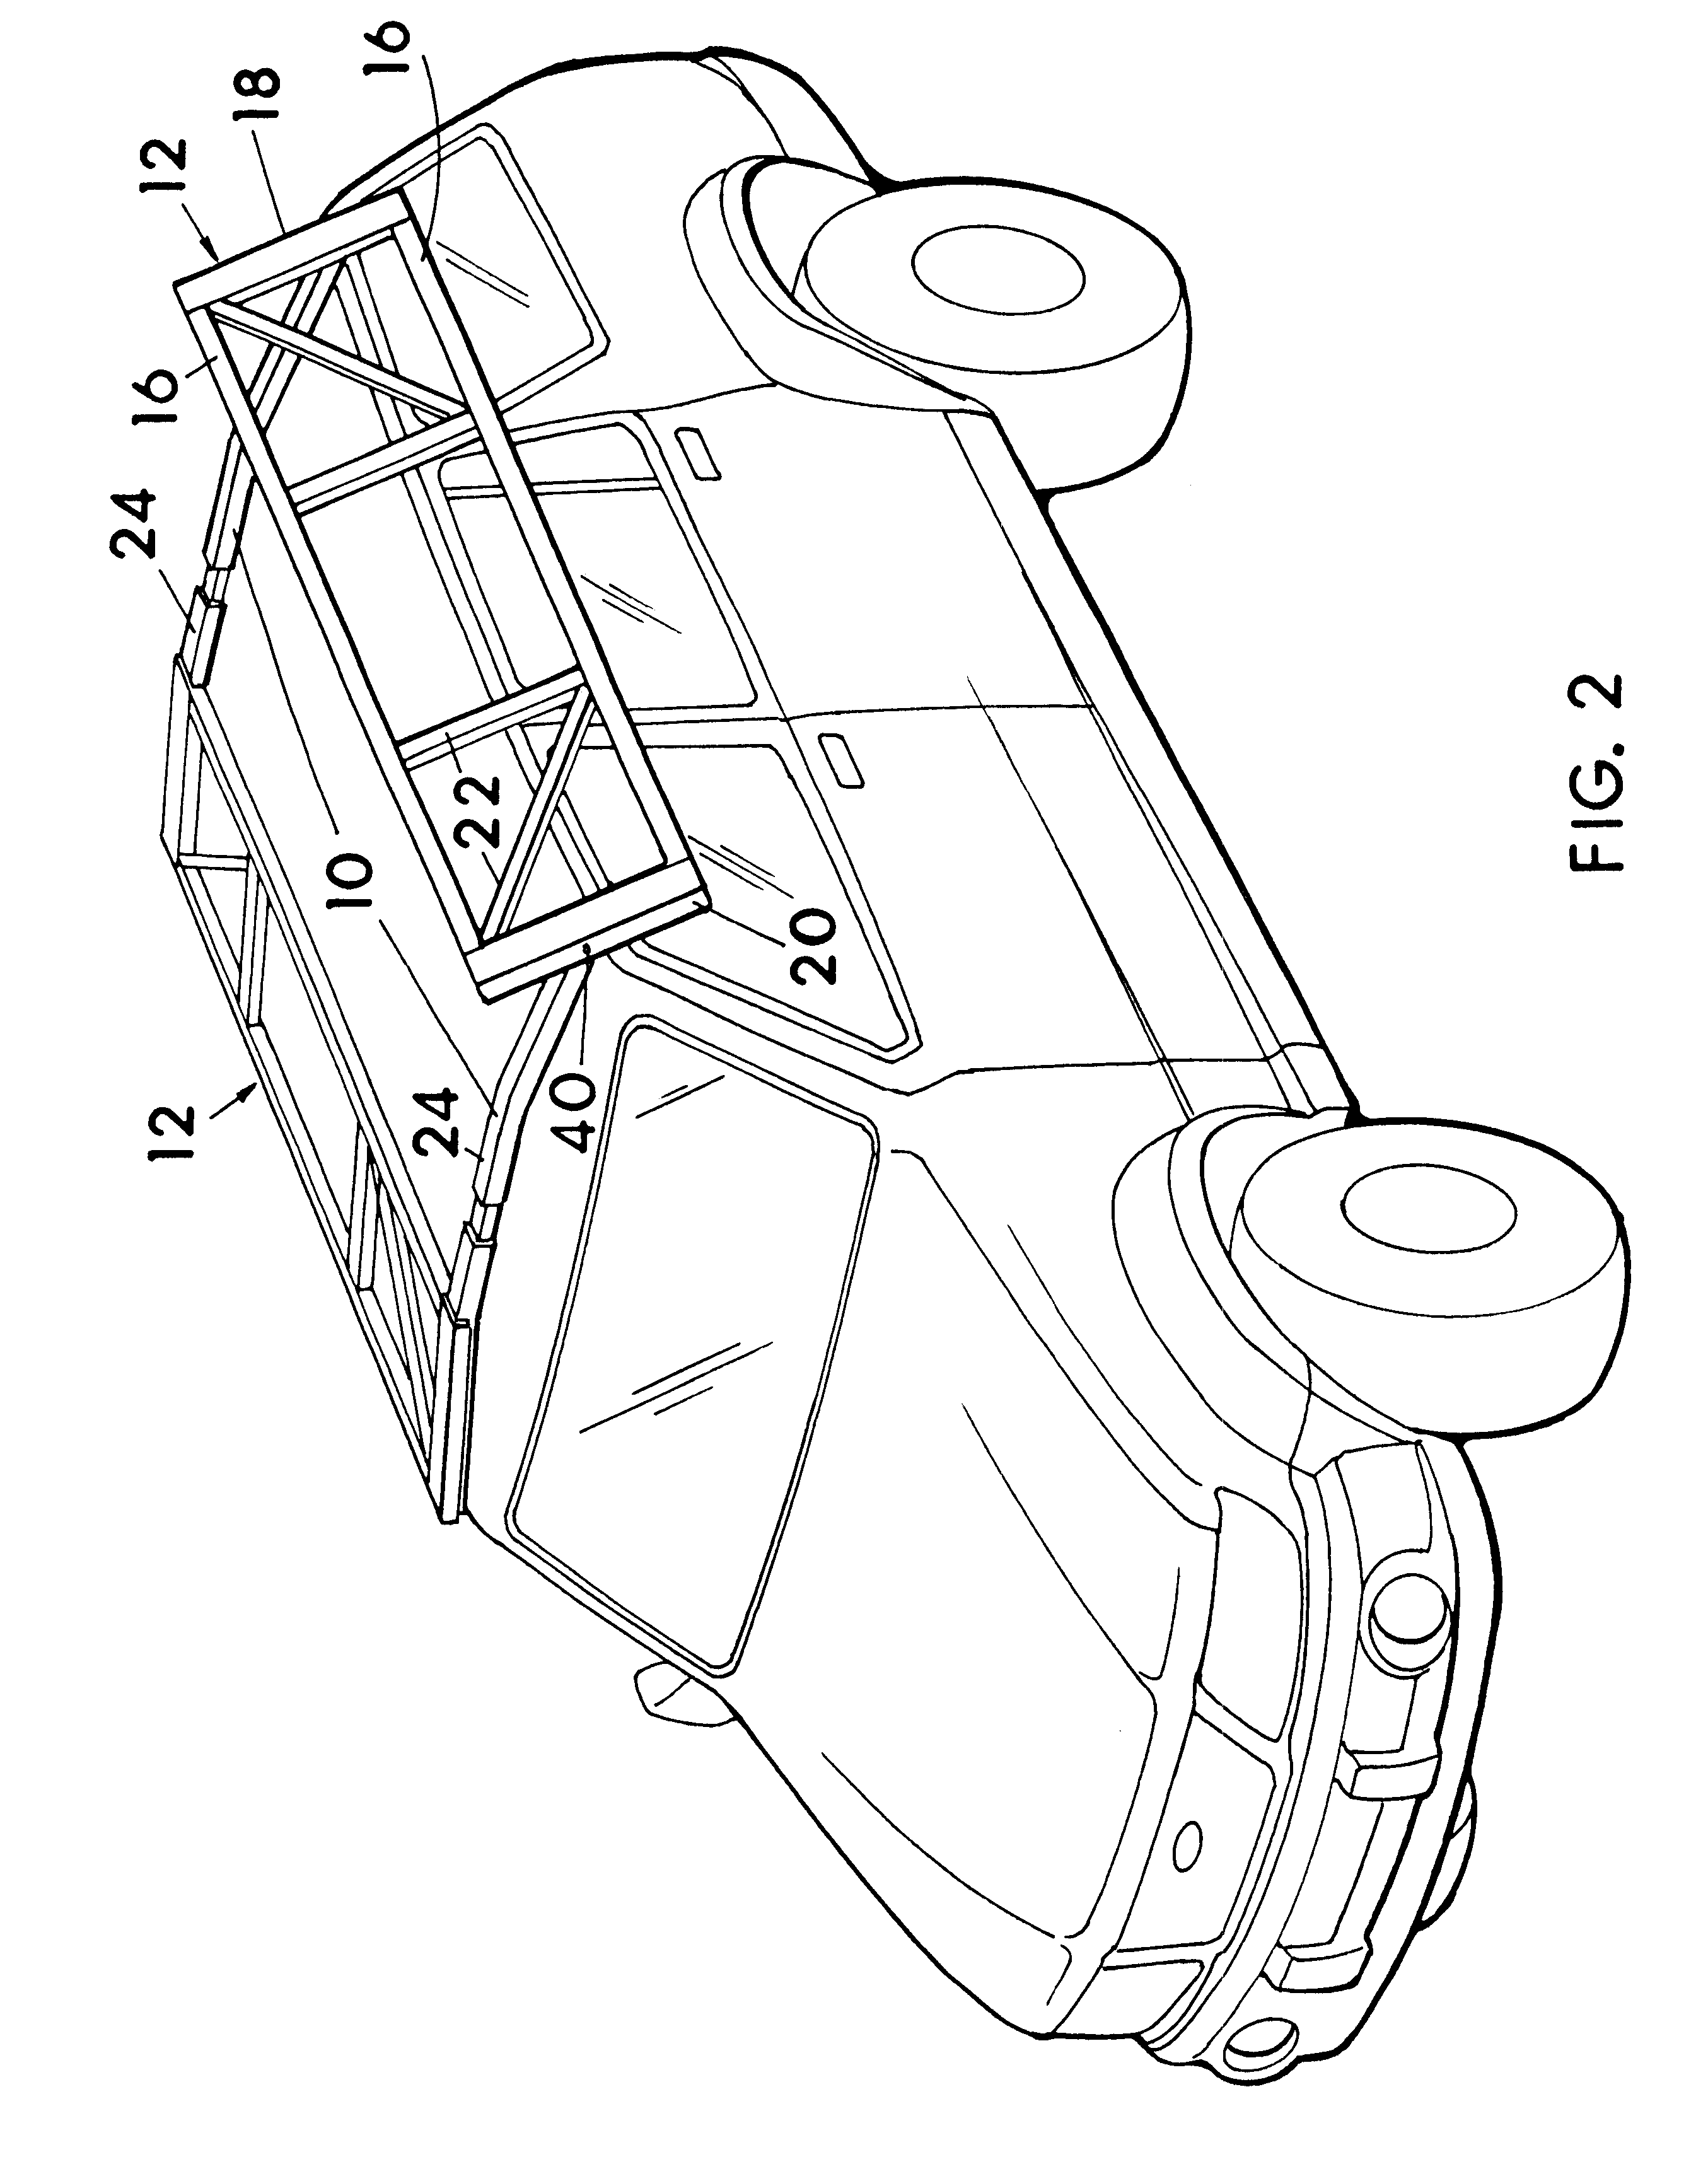 Tiltable rooftop cargo carrier for a vehicle